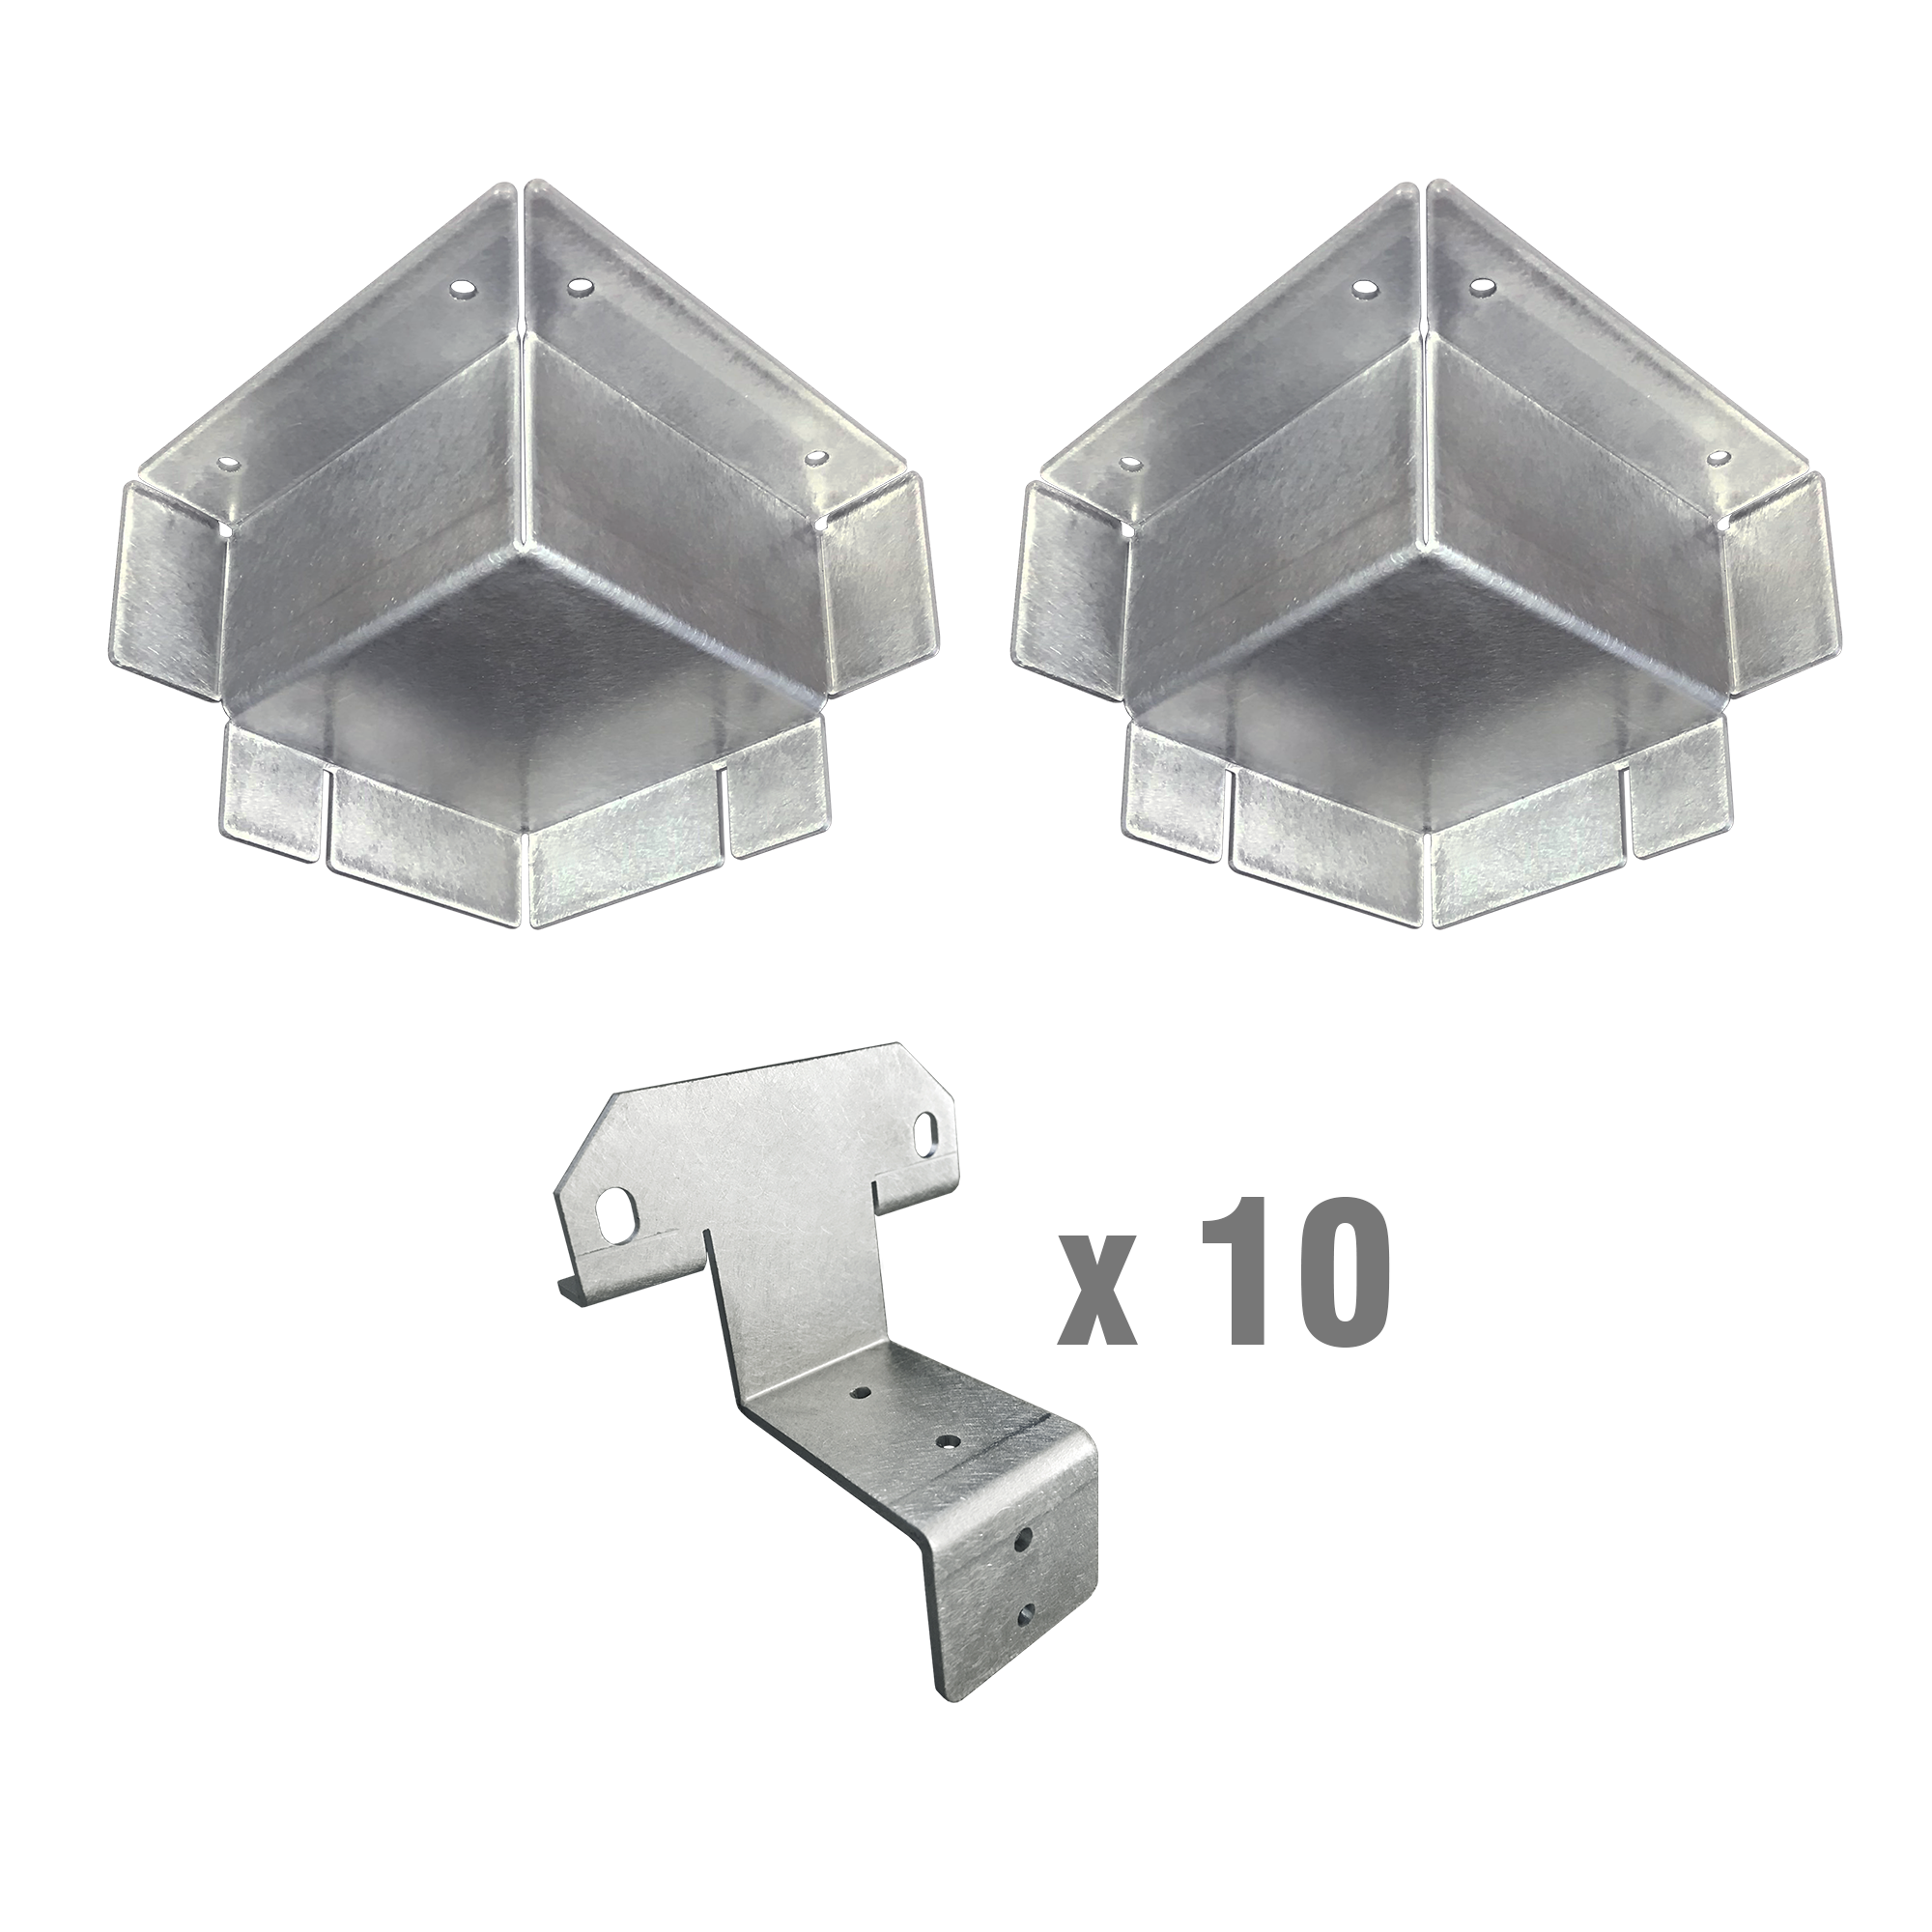 Steel Stud Framing Kit for Shipping Containers/Sea Cans (Composite Brackets) - 2 Corner Casting Covers + Composite Steel Stud Brackets + Hardware